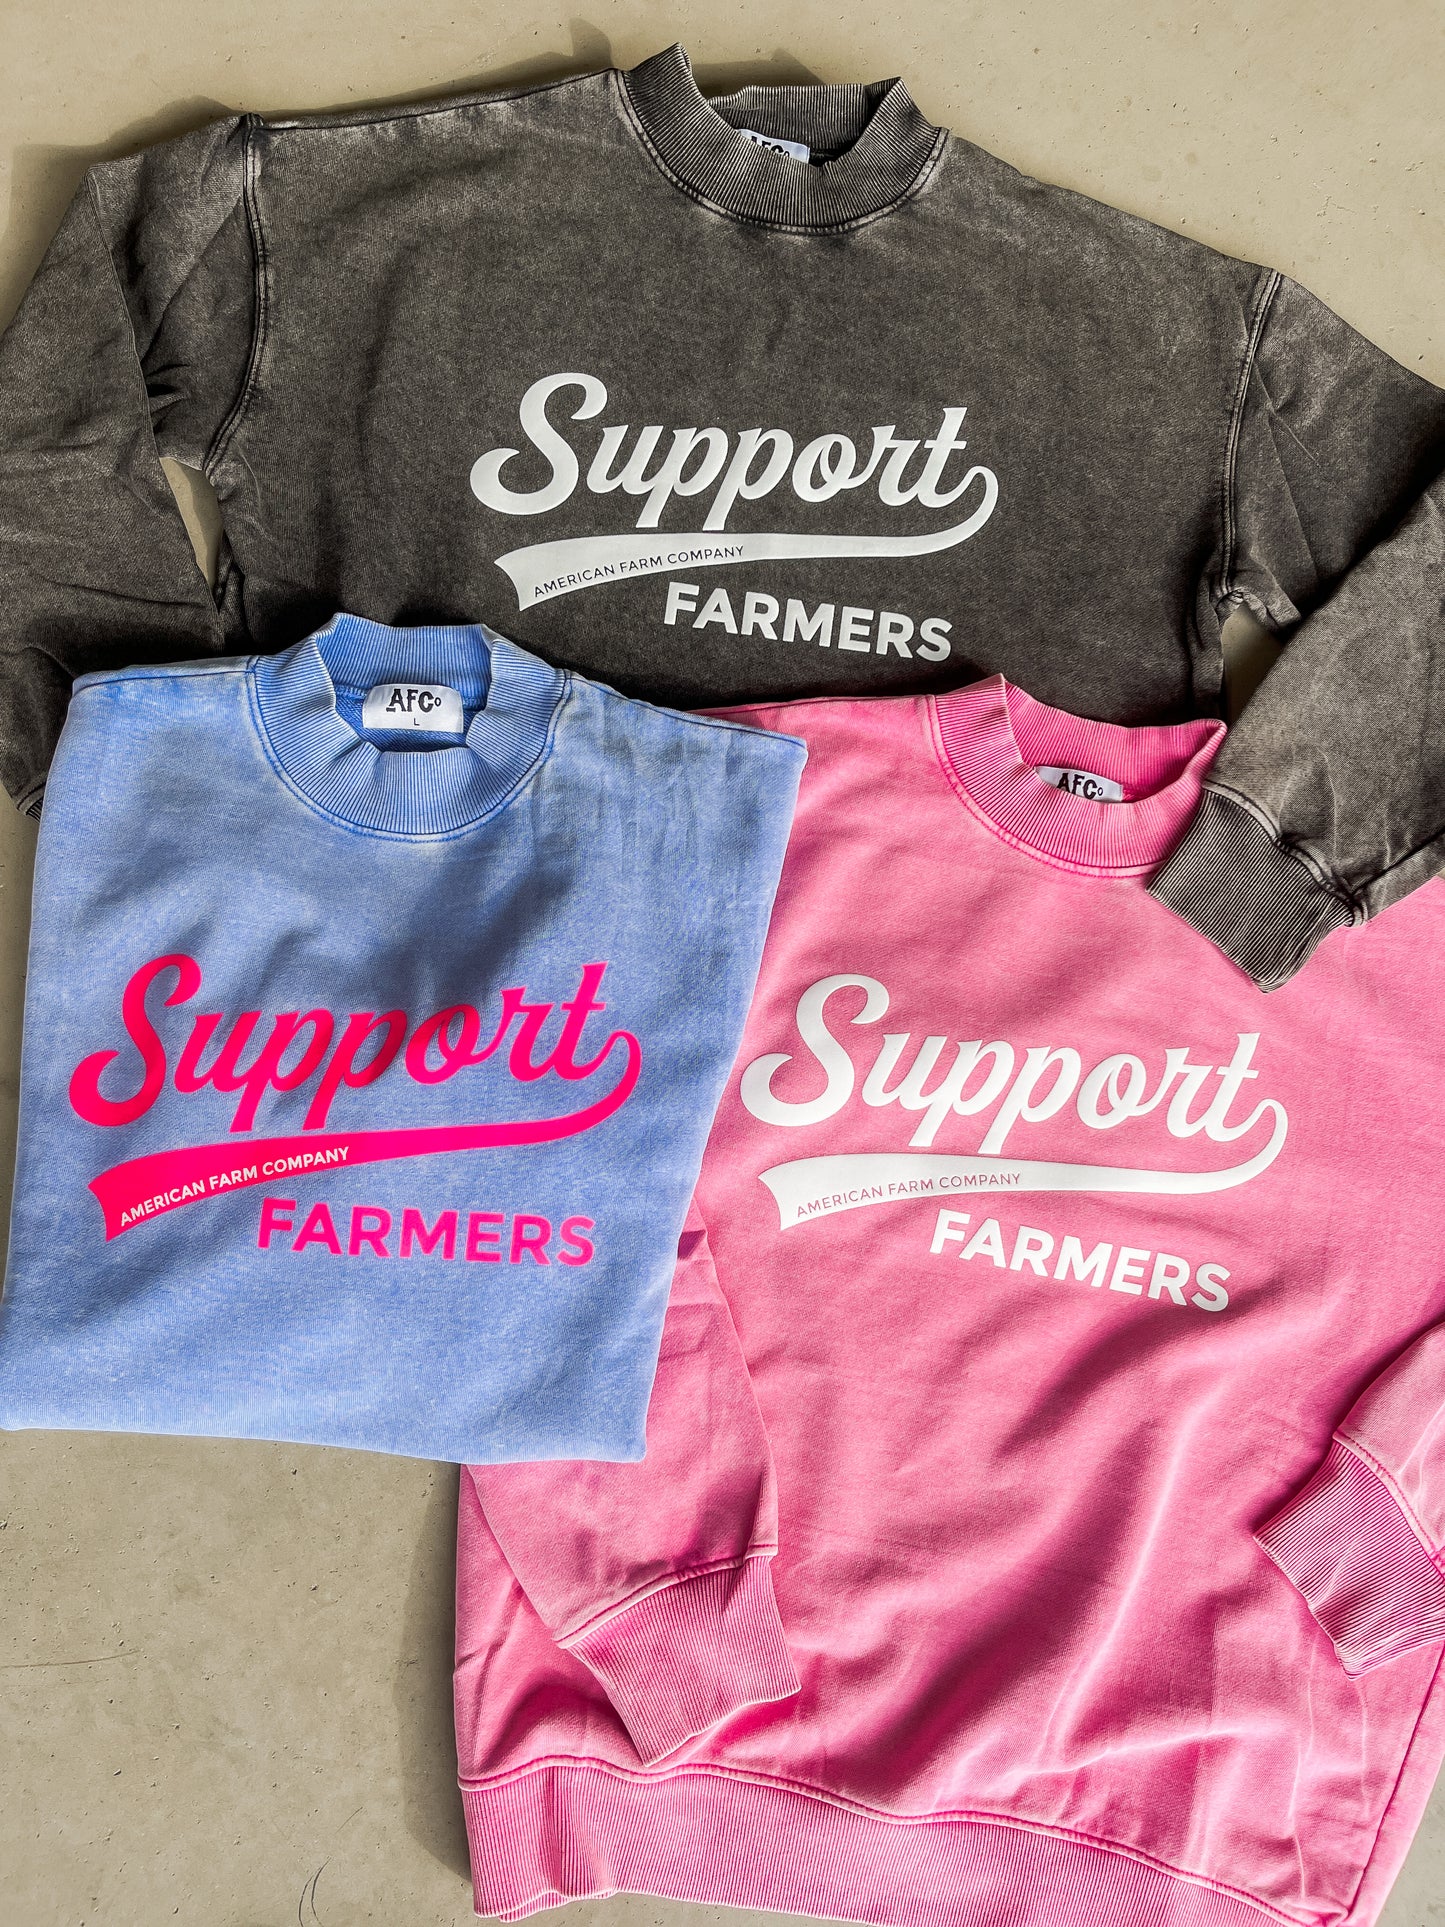 'Support Farmers' Washed Hot Pink Everyday Crewneck